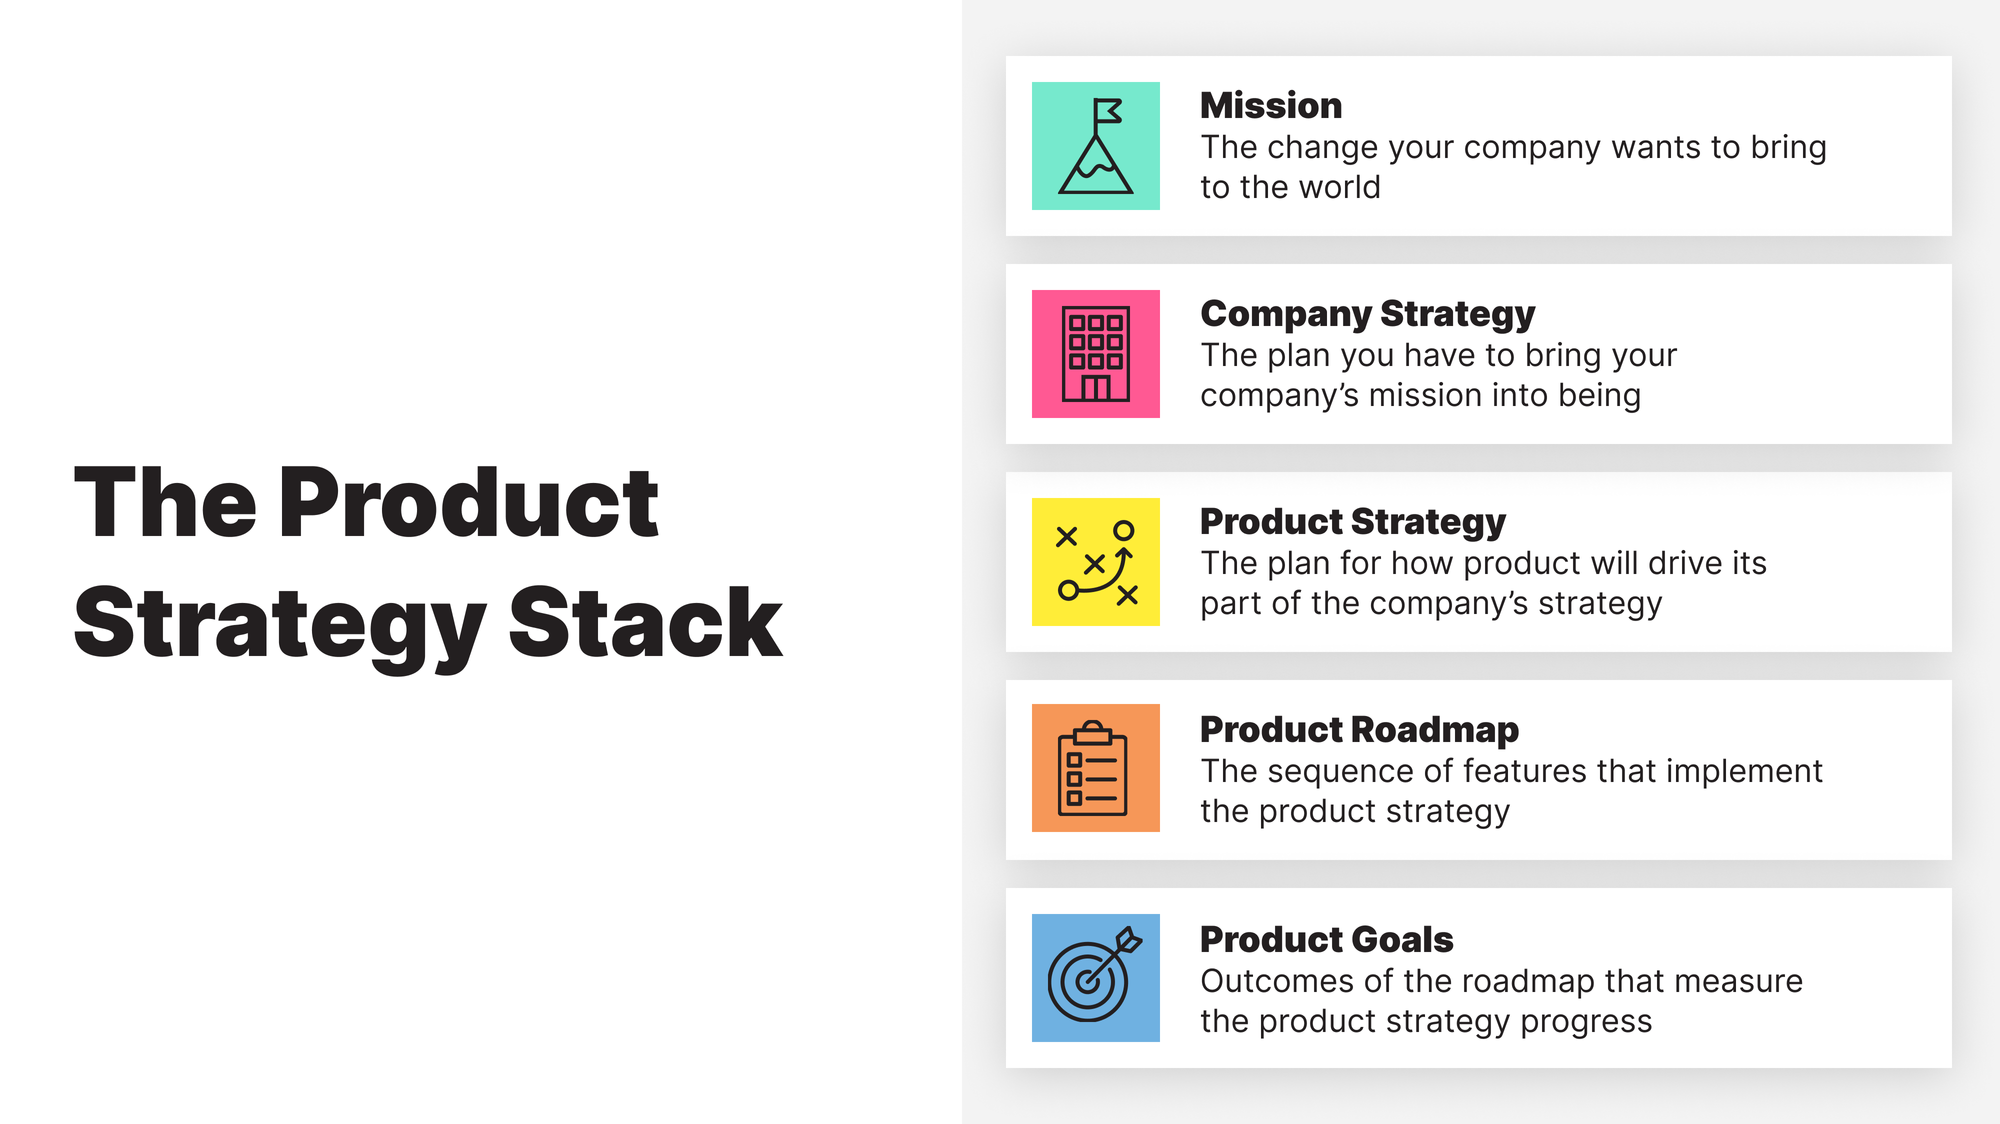 Illustration of the Product Strategy Stack, in order: Mission, Company Strategy, Product Strategy, Product Roadmap, Product Goals